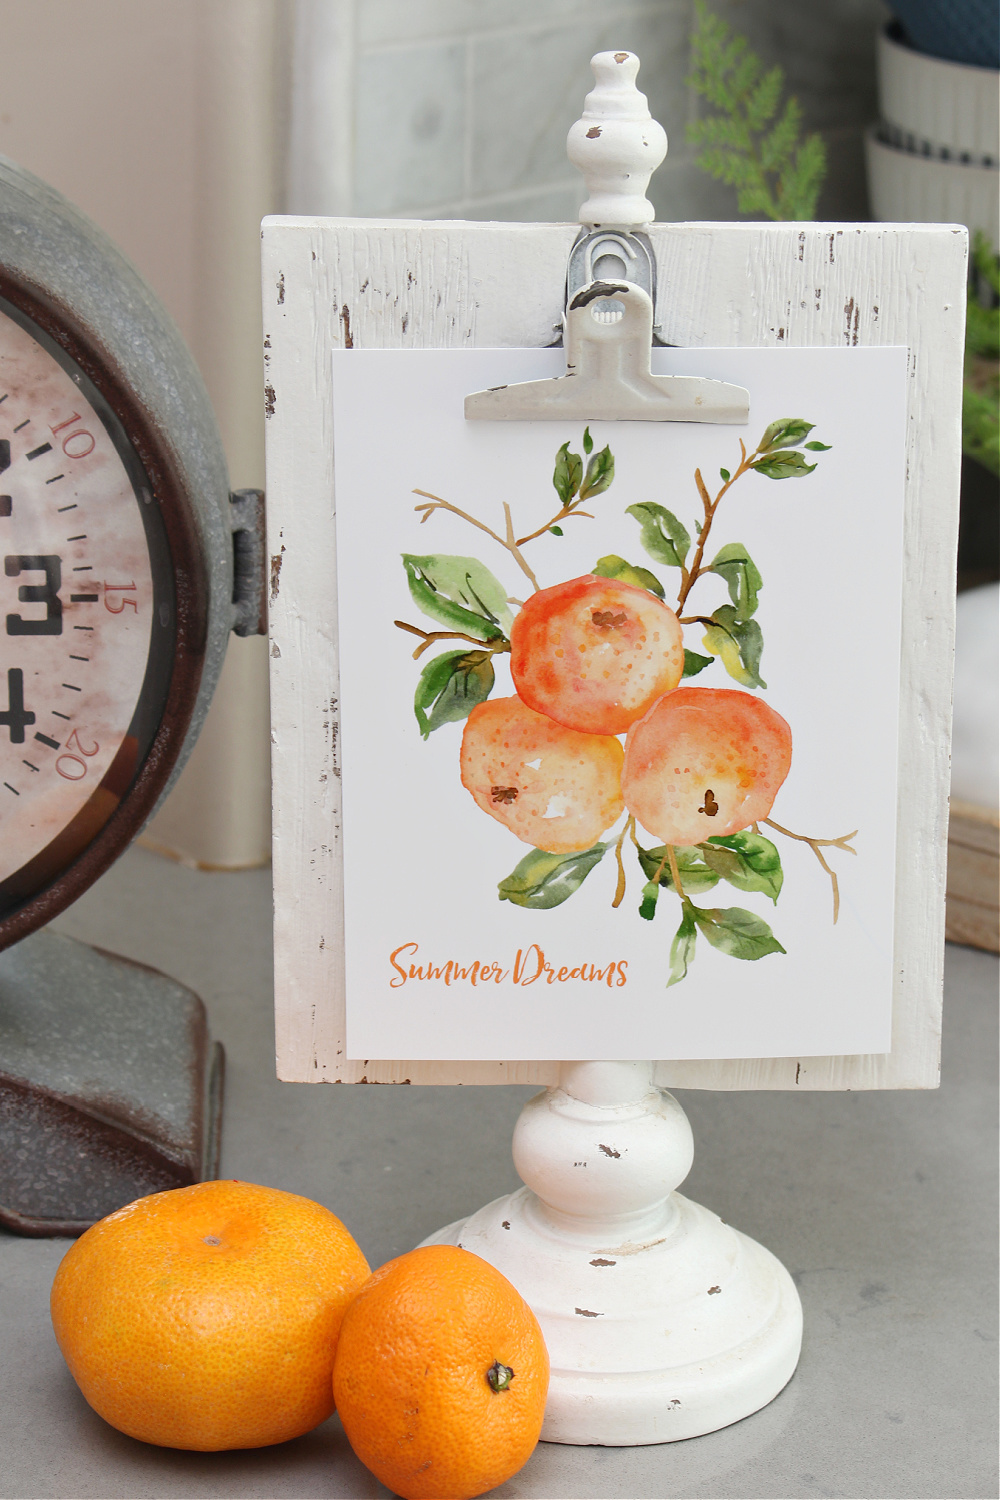 Tangerine art displayed in a white clipboard frame.